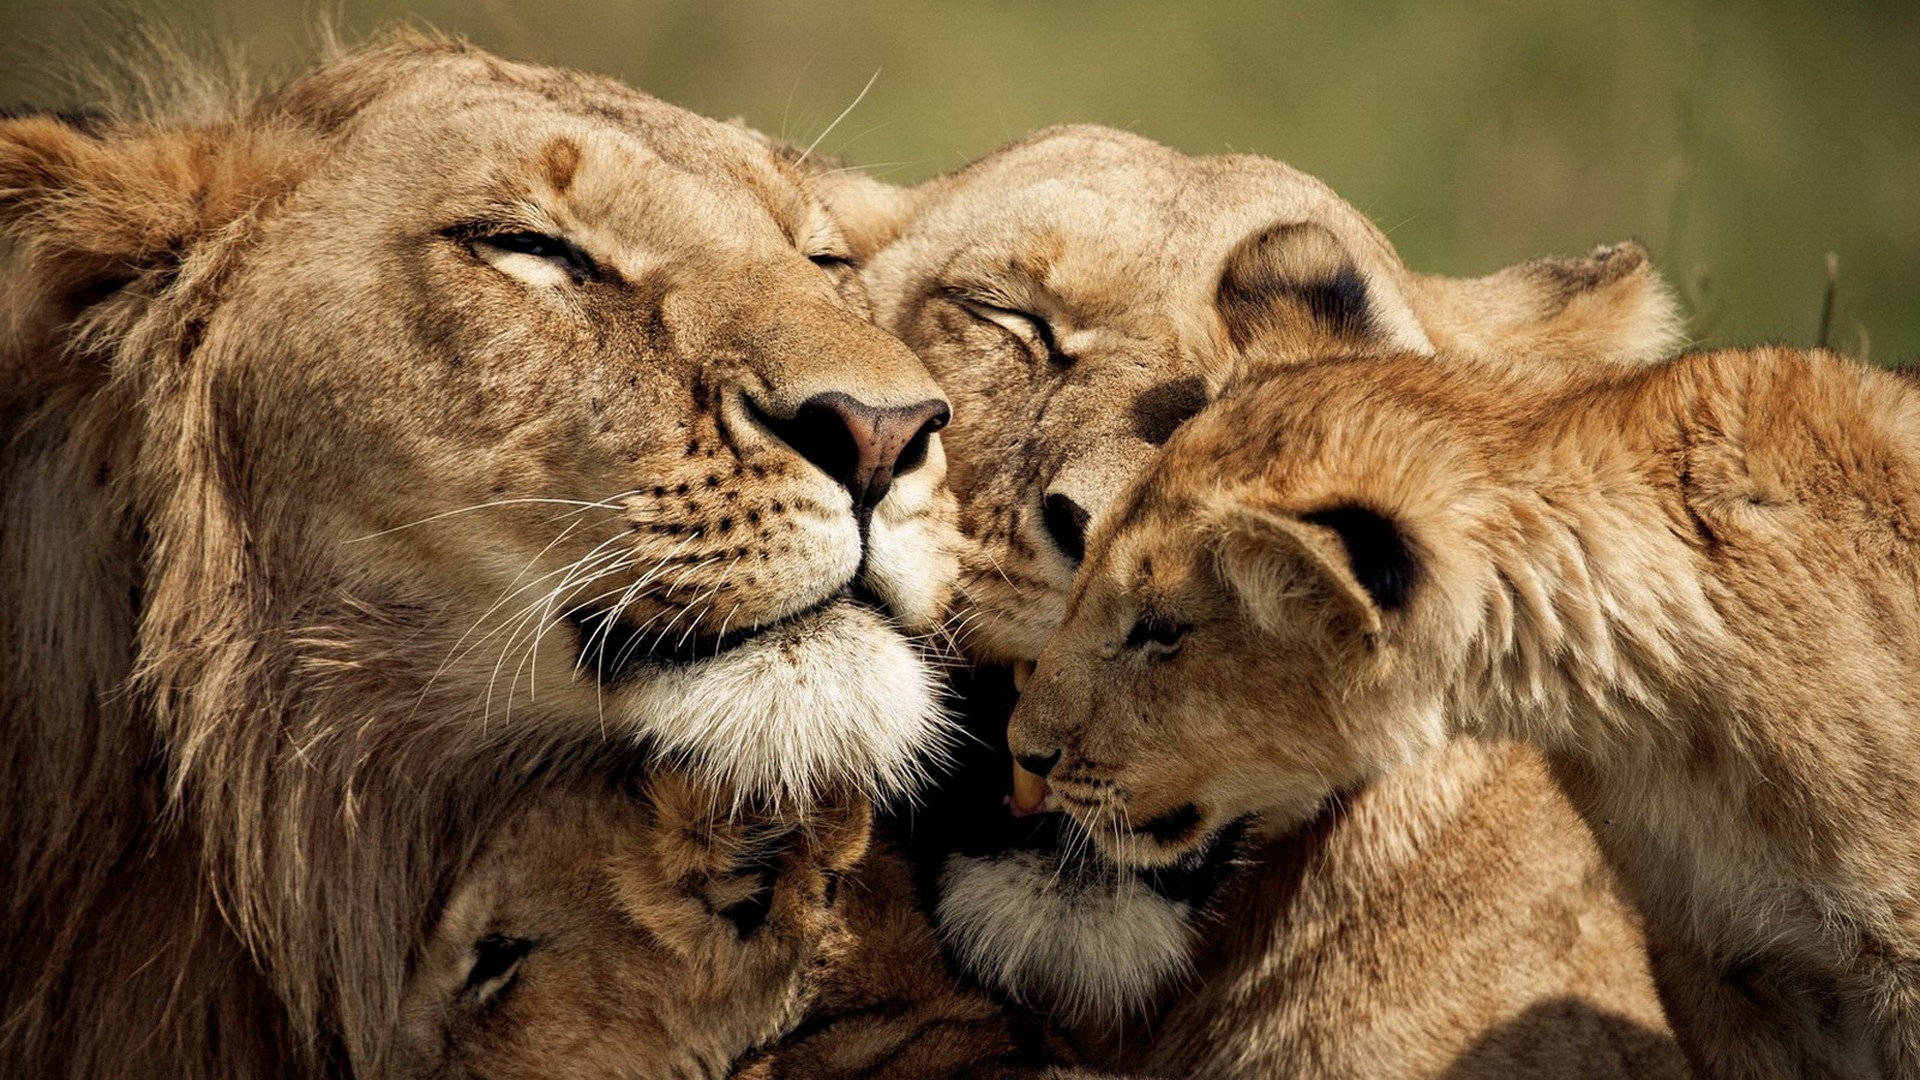 Lions And Cubs In The Wild Wallpaper